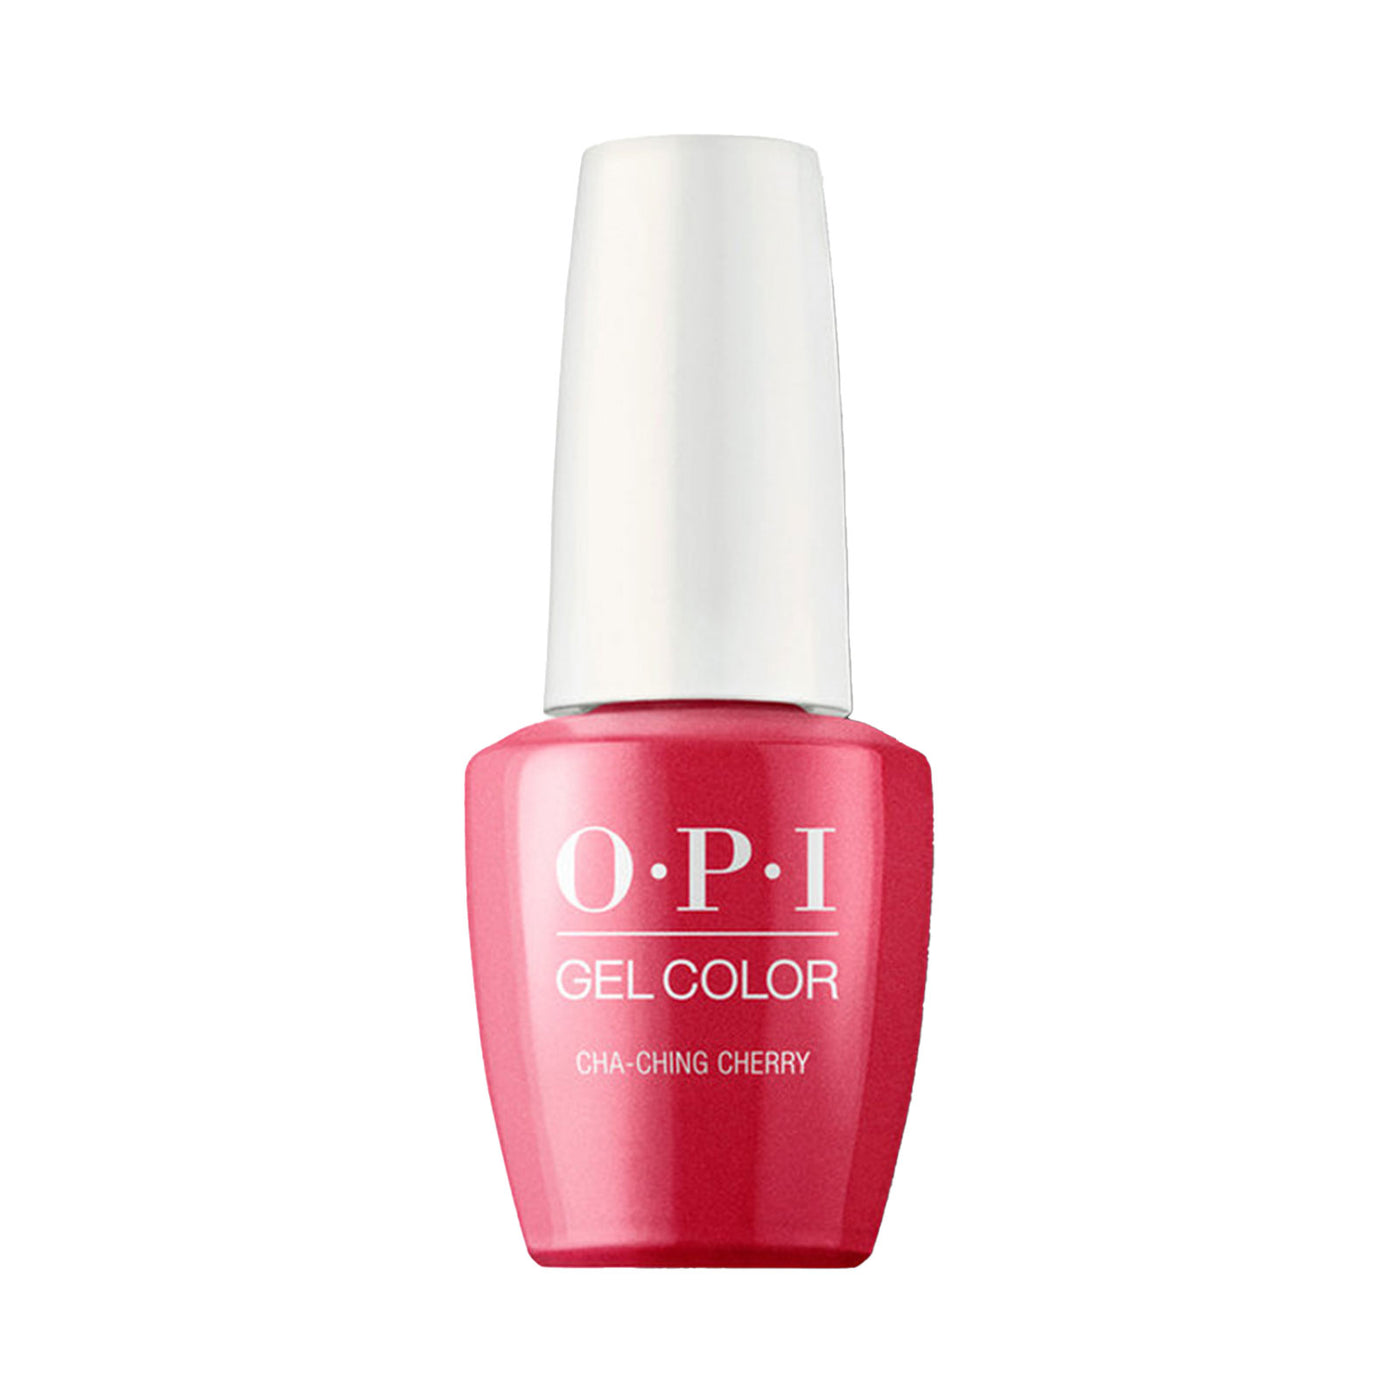 OPI GelColor GCV12 - Cha-Ching Cherry 15ml